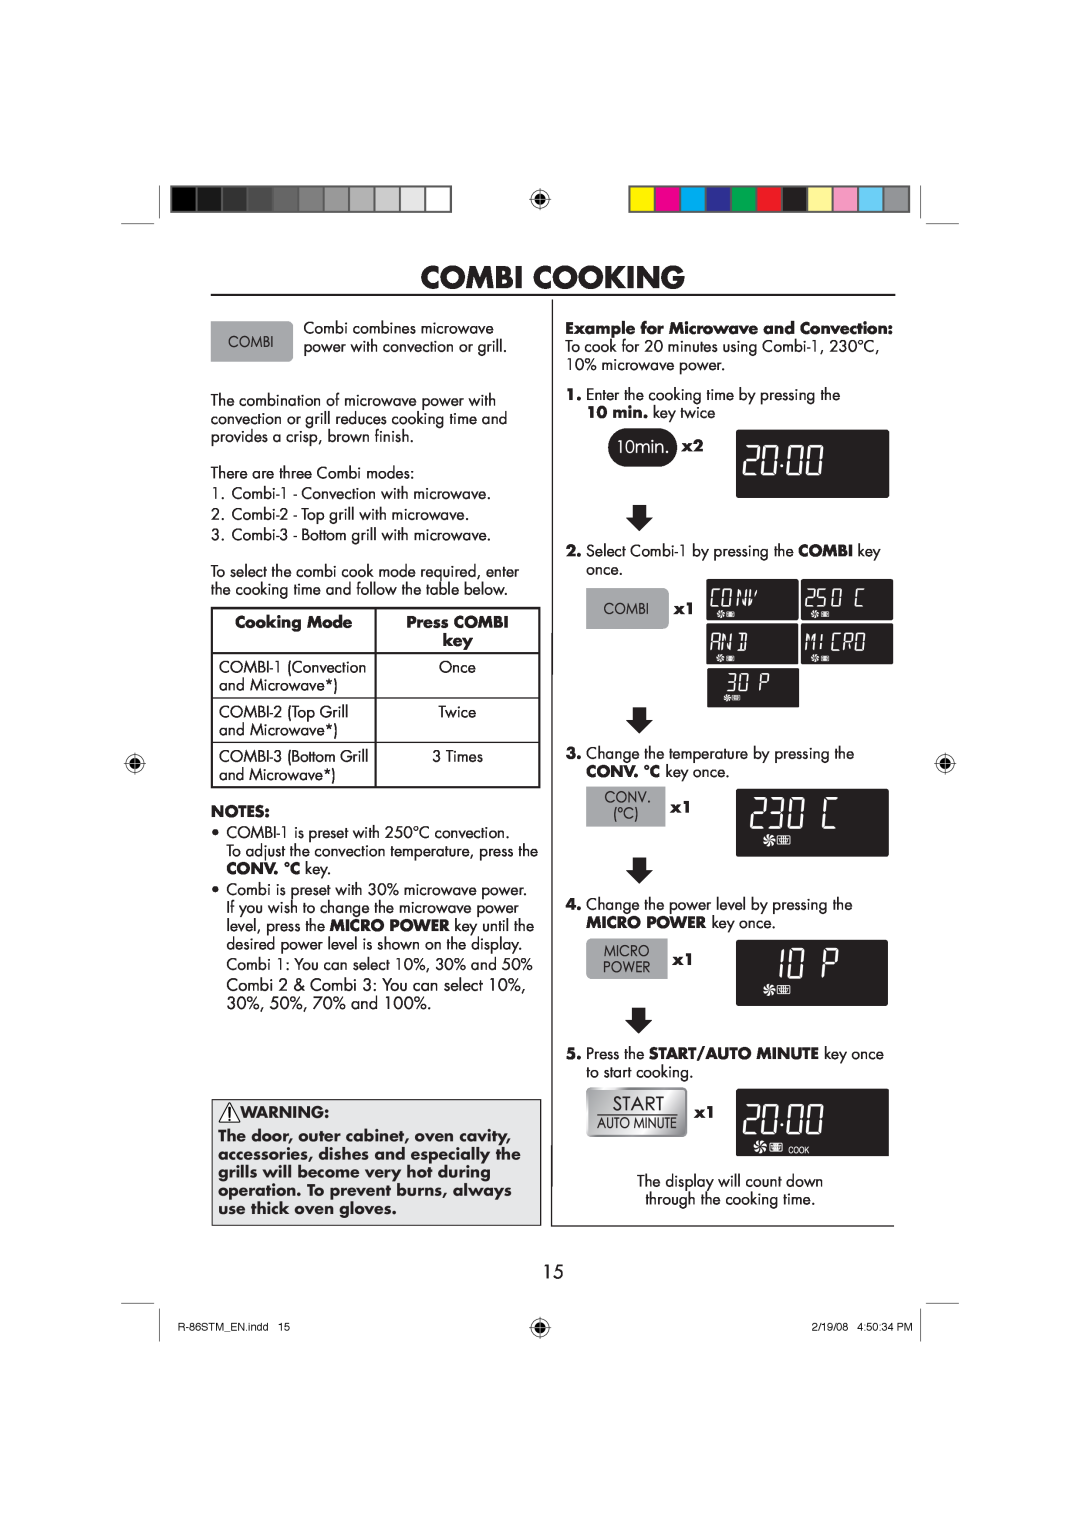 Sharp R-86STM manual Combi Cooking, Combi 2 & Combi 3 You can select 10%, 30%, 50%, 70% and 100%, Cooking Mode, Press COMBI 